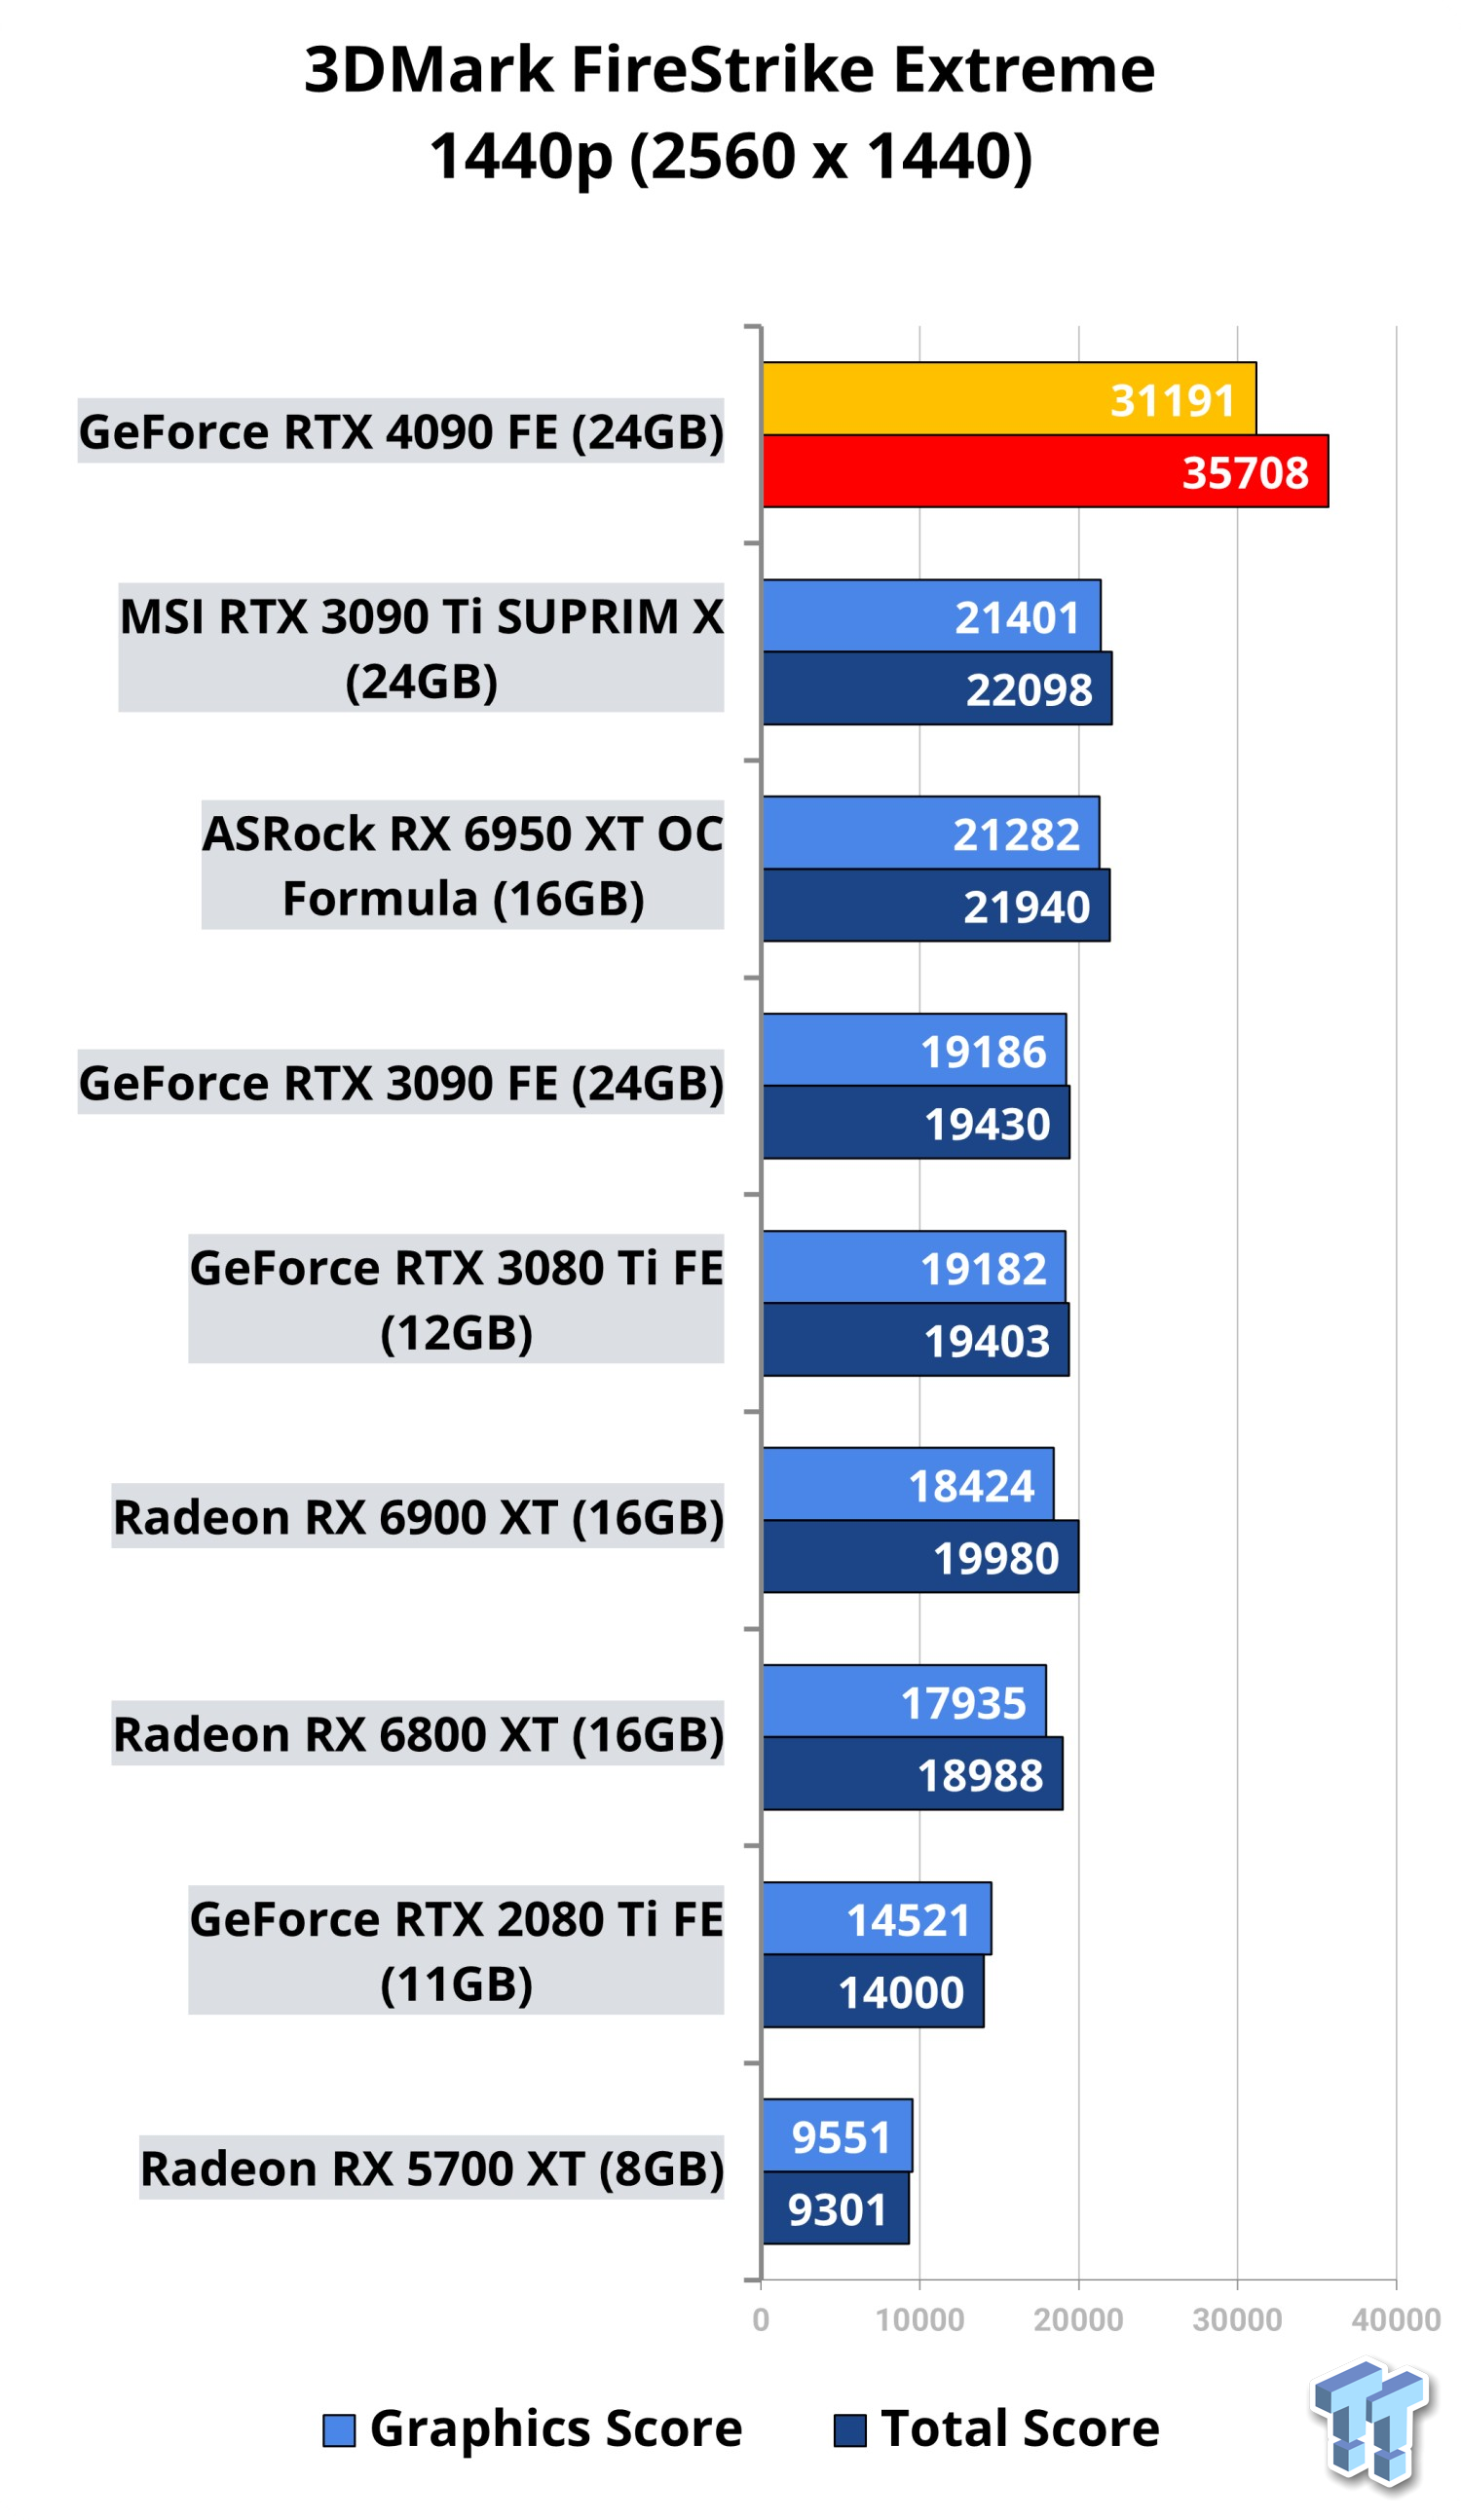 GeForce RTX 4090: here are the first benchmarks